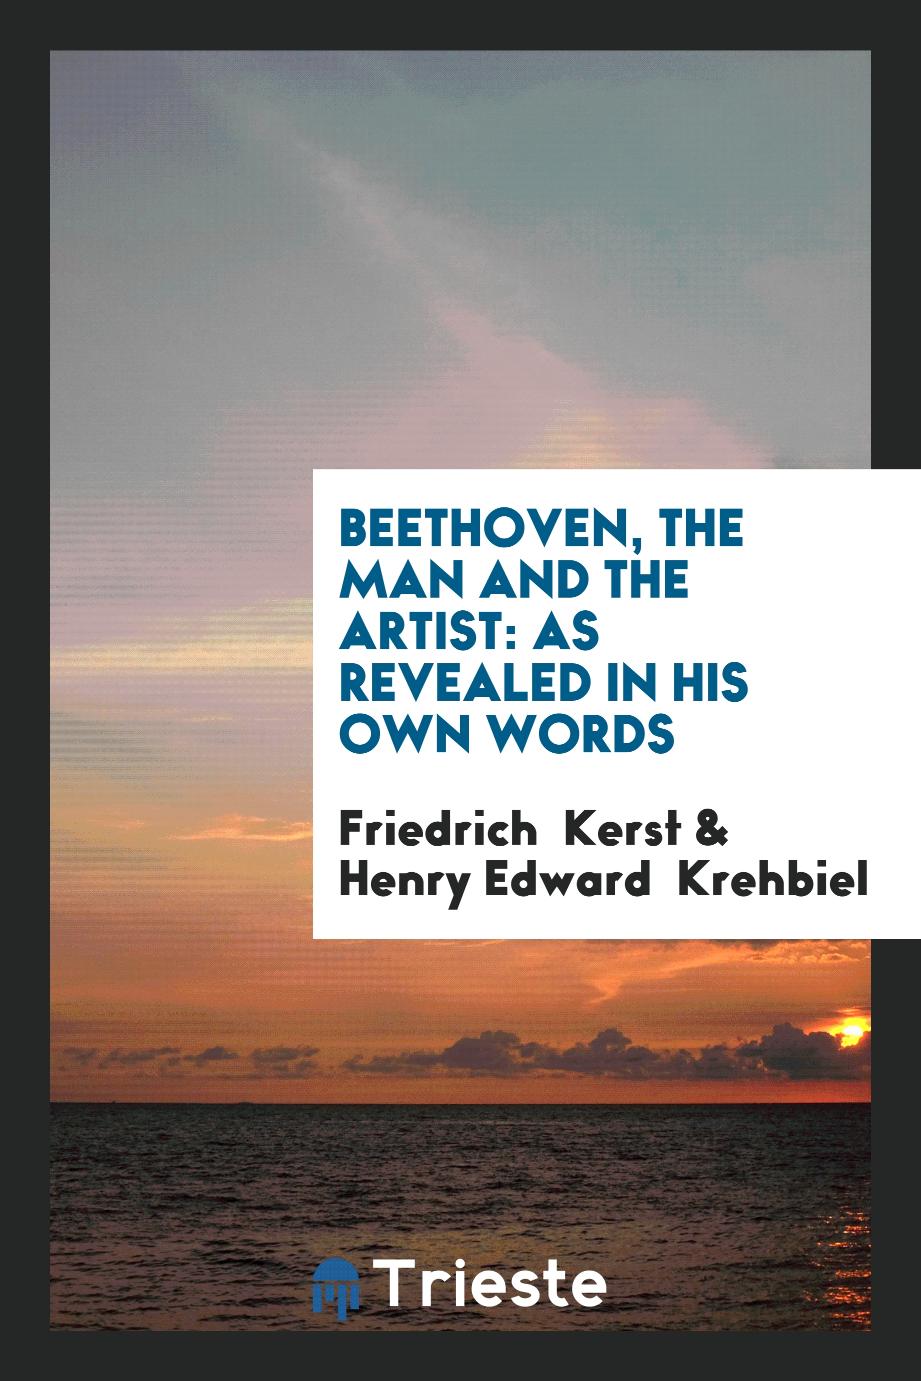 Beethoven, the Man and the Artist: As Revealed in His Own Words